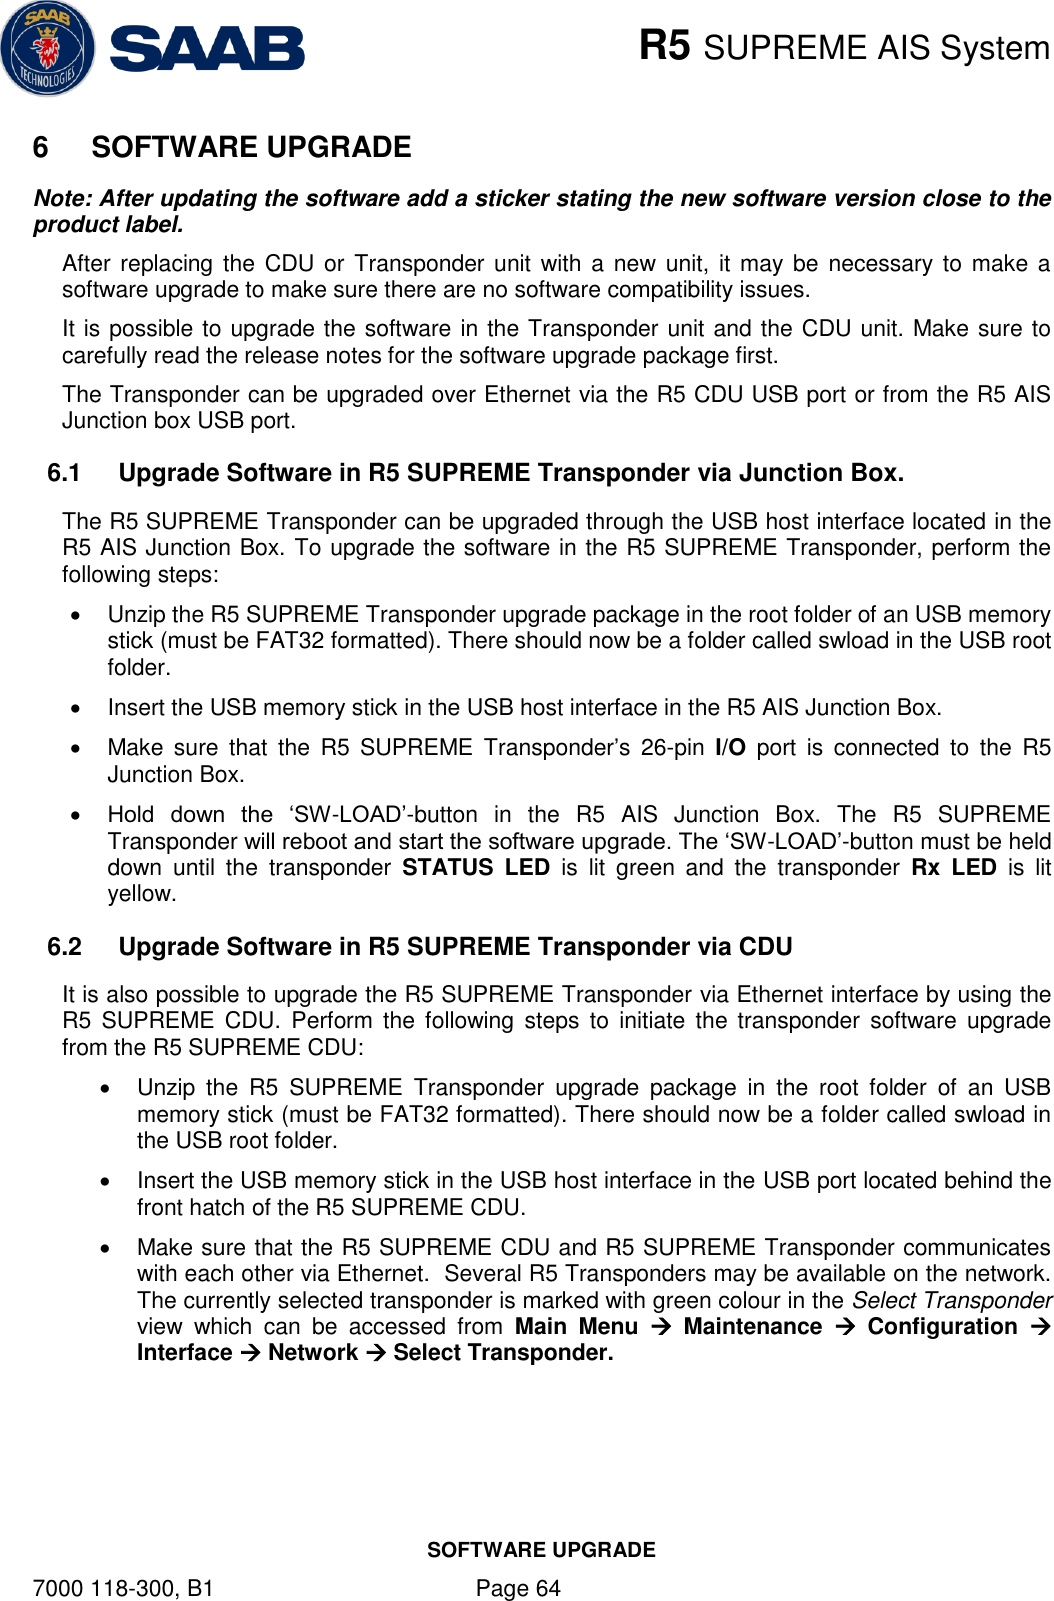    R5 SUPREME AIS System SOFTWARE UPGRADE 7000 118-300, B1    Page 64 6  SOFTWARE UPGRADE Note: After updating the software add a sticker stating the new software version close to the product label. After replacing the CDU or  Transponder unit with a new  unit,  it may be necessary to make a software upgrade to make sure there are no software compatibility issues. It is possible to upgrade the software in the Transponder unit and the CDU unit. Make sure to carefully read the release notes for the software upgrade package first.  The Transponder can be upgraded over Ethernet via the R5 CDU USB port or from the R5 AIS Junction box USB port.  6.1  Upgrade Software in R5 SUPREME Transponder via Junction Box.  The R5 SUPREME Transponder can be upgraded through the USB host interface located in the R5 AIS Junction Box. To upgrade the software in the R5 SUPREME Transponder, perform the following steps:   Unzip the R5 SUPREME Transponder upgrade package in the root folder of an USB memory stick (must be FAT32 formatted). There should now be a folder called swload in the USB root folder.   Insert the USB memory stick in the USB host interface in the R5 AIS Junction Box.   Make  sure  that  the  R5  SUPREME  Transponder’s  26-pin  I/O  port  is  connected  to  the  R5 Junction Box.  Hold  down  the  ‘SW-LOAD’-button  in  the  R5  AIS  Junction  Box.  The  R5  SUPREME Transponder will reboot and start the software upgrade. The ‘SW-LOAD’-button must be held down  until  the  transponder  STATUS  LED  is  lit  green  and  the  transponder  Rx  LED  is  lit yellow. 6.2  Upgrade Software in R5 SUPREME Transponder via CDU It is also possible to upgrade the R5 SUPREME Transponder via Ethernet interface by using the R5  SUPREME  CDU.  Perform  the following steps  to  initiate  the transponder  software  upgrade from the R5 SUPREME CDU:   Unzip  the  R5  SUPREME  Transponder  upgrade  package  in  the  root  folder  of  an  USB memory stick (must be FAT32 formatted). There should now be a folder called swload in the USB root folder.   Insert the USB memory stick in the USB host interface in the USB port located behind the front hatch of the R5 SUPREME CDU.   Make sure that the R5 SUPREME CDU and R5 SUPREME Transponder communicates with each other via Ethernet.  Several R5 Transponders may be available on the network. The currently selected transponder is marked with green colour in the Select Transponder view  which  can  be  accessed  from  Main  Menu    Maintenance    Configuration   Interface  Network  Select Transponder.  